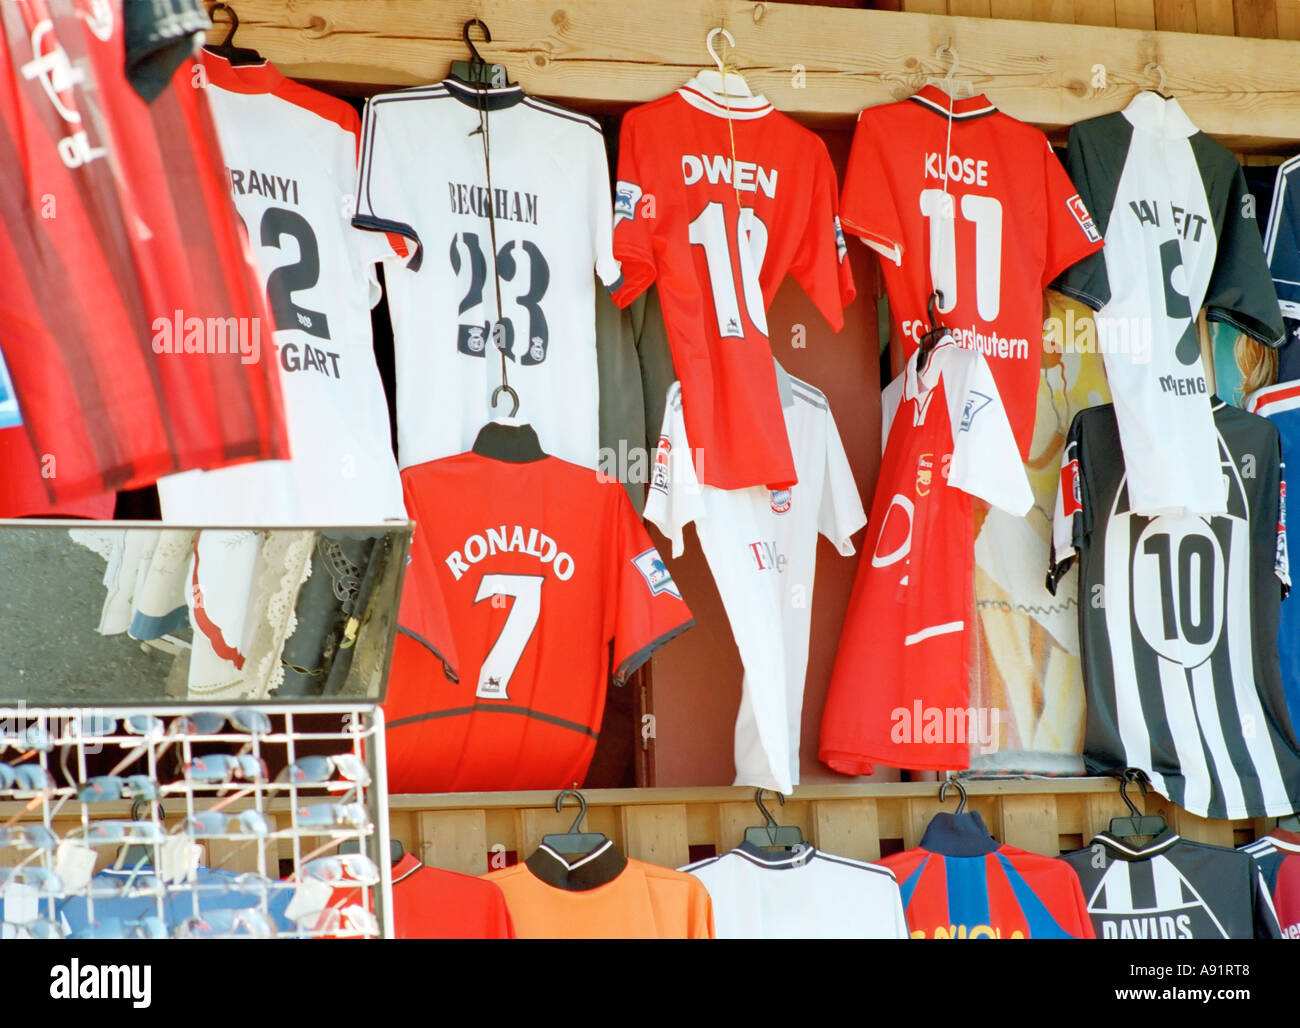 replica football shirts on sale in a street market Stock Photo - Alamy